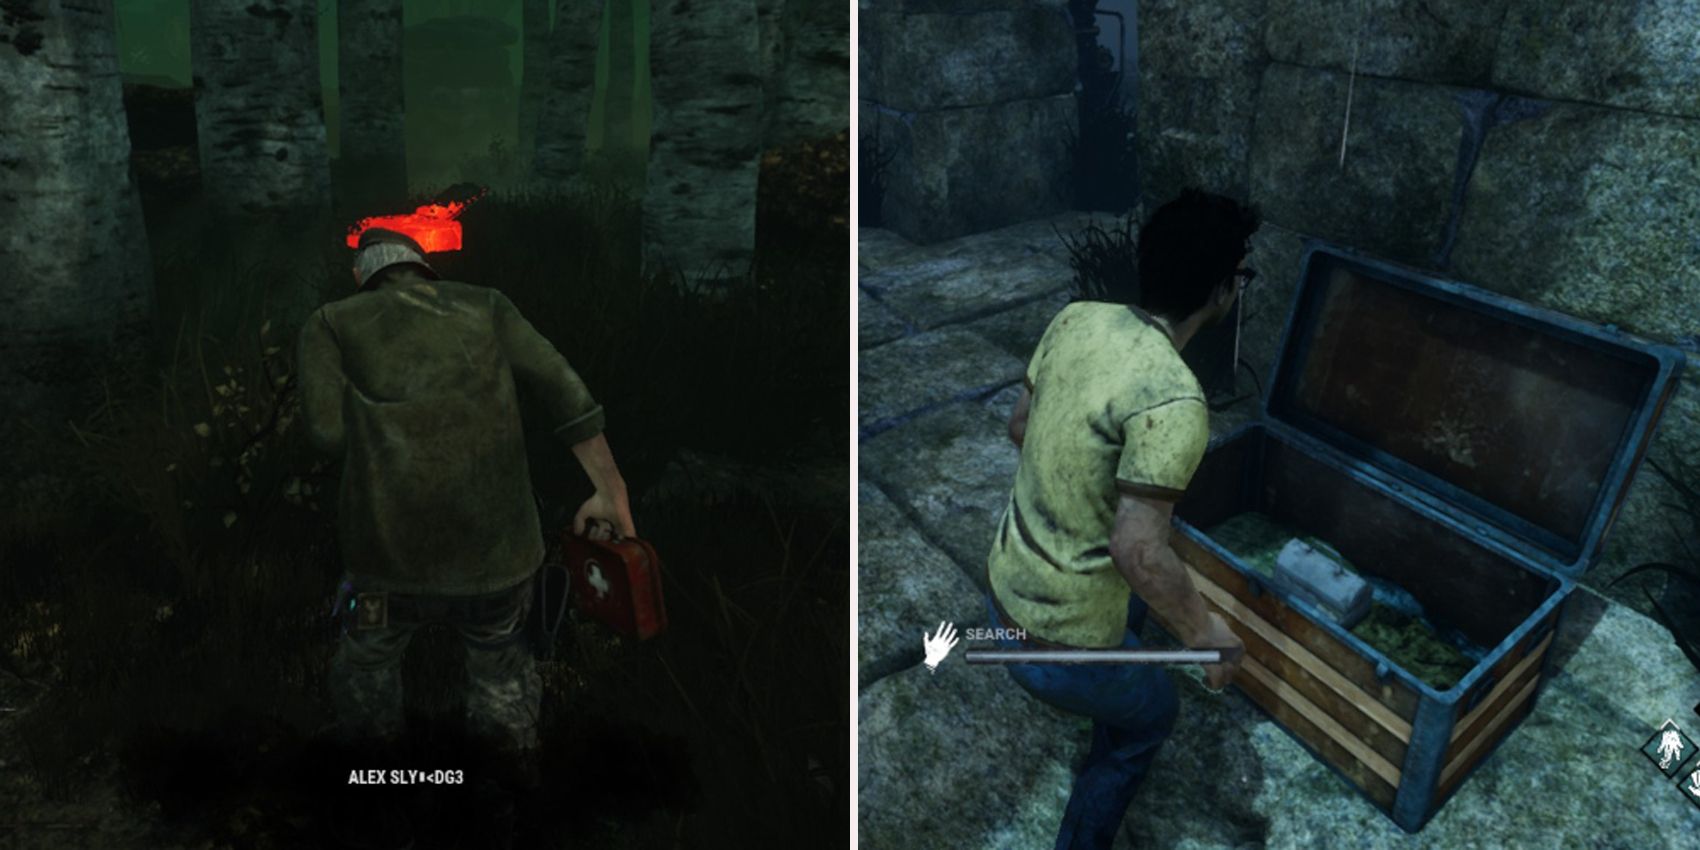 All Dead By Daylight Easter Eggs In Hooked On You